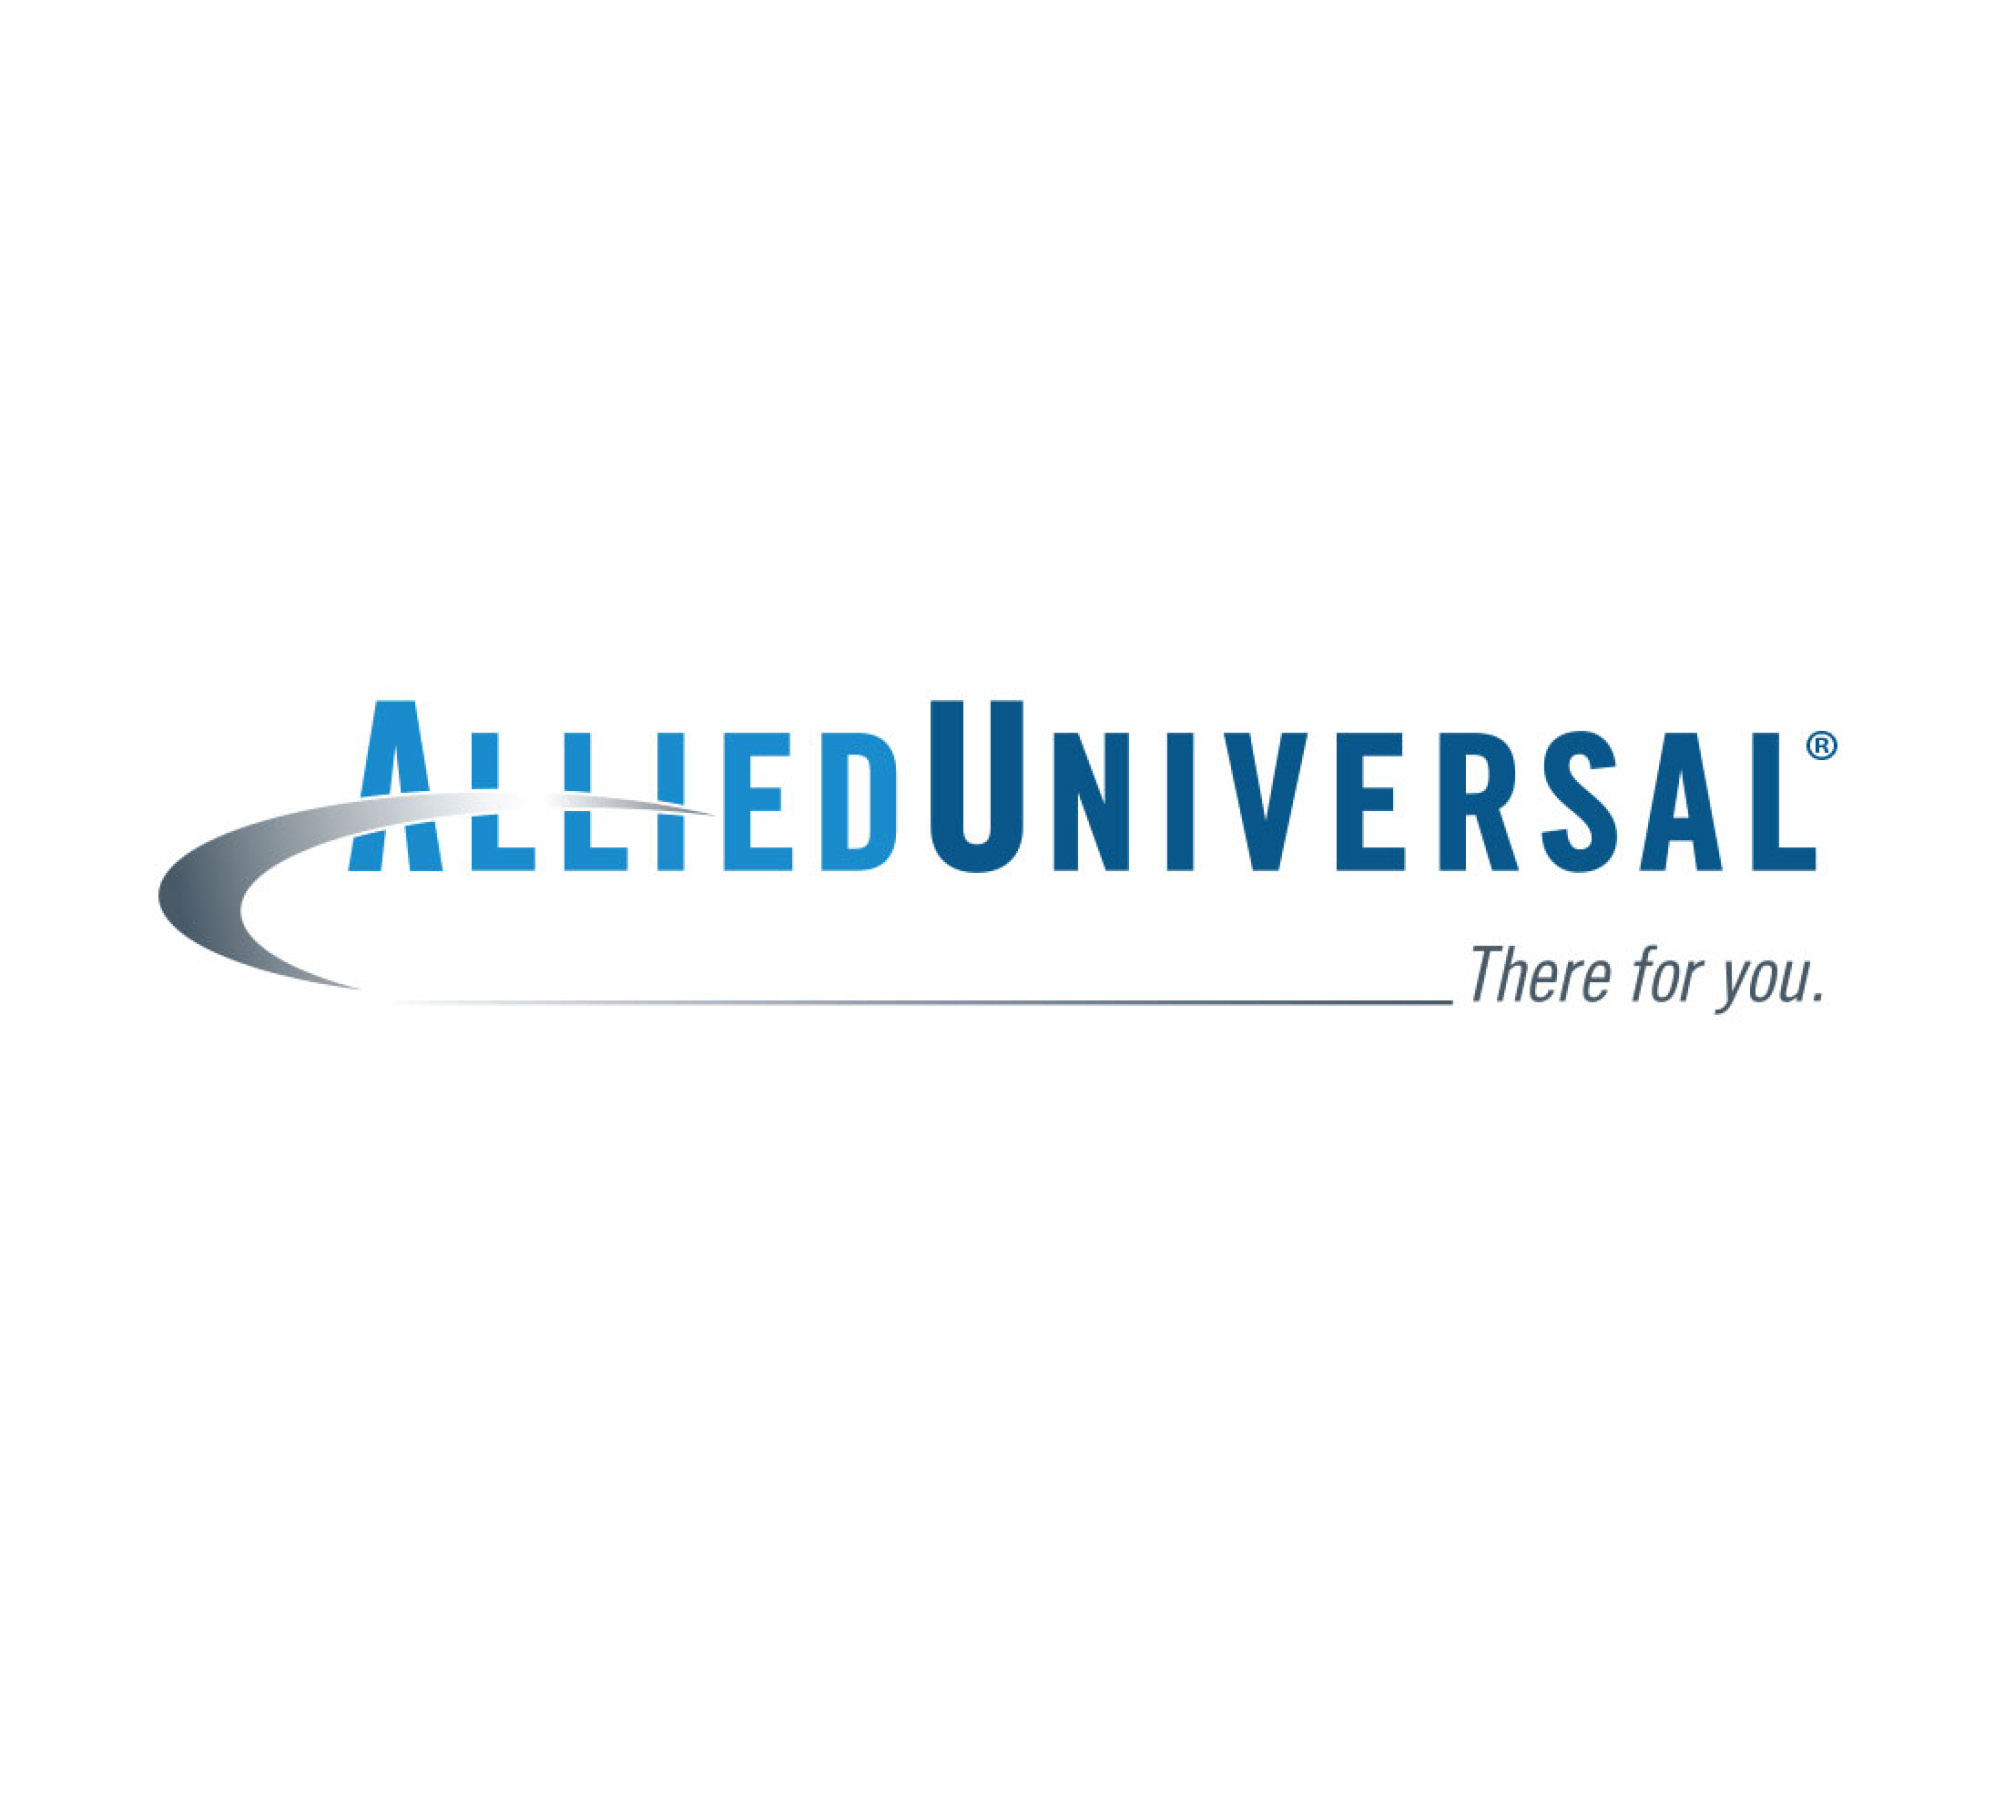 Allied Universal Security Services